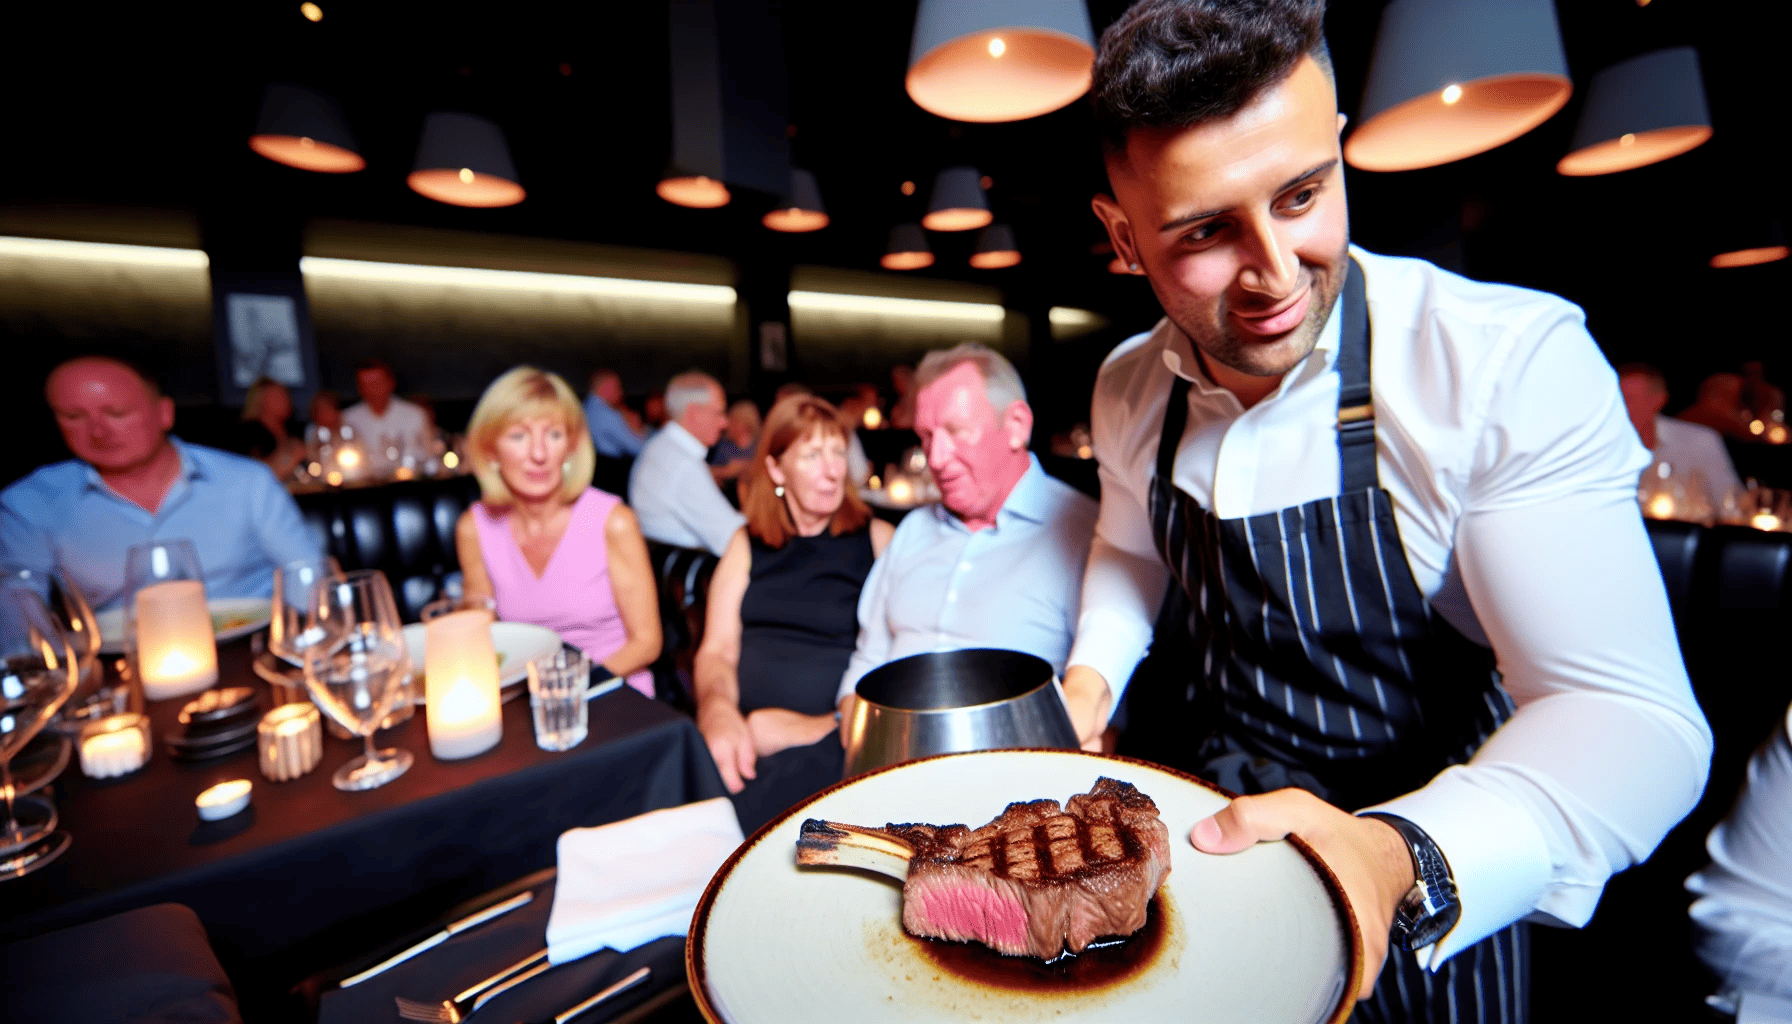 A sizzling hot steak being served at a steakhouse in Belfast